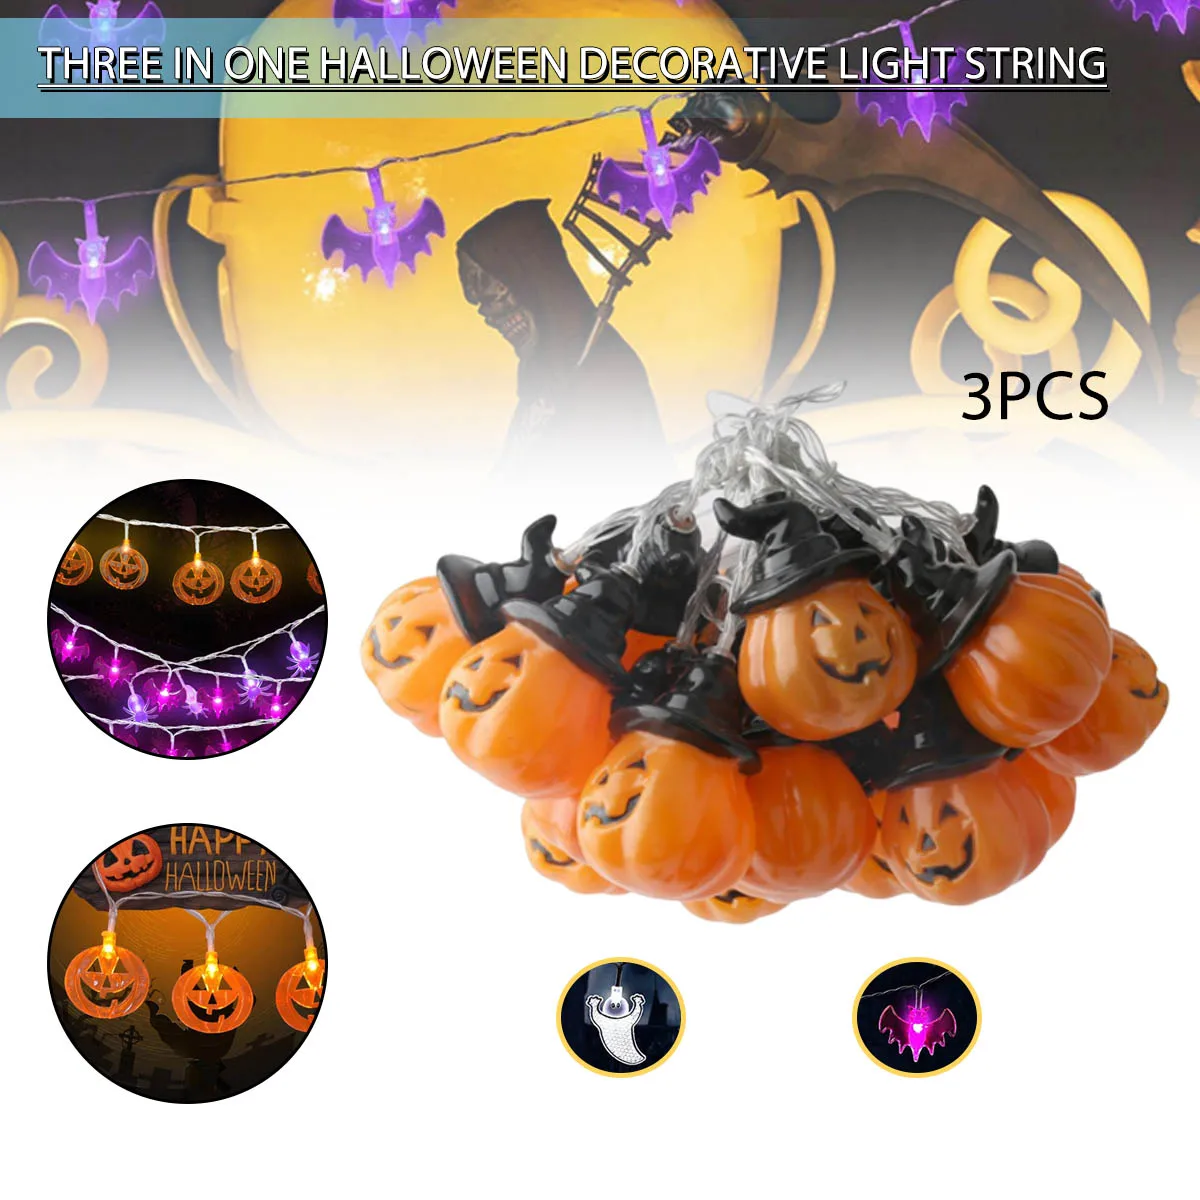 

Halloween Decorative Lamp String Artificial Pumpkin LED Light String Festive Party Supplies Event DIY Holiday Decorations